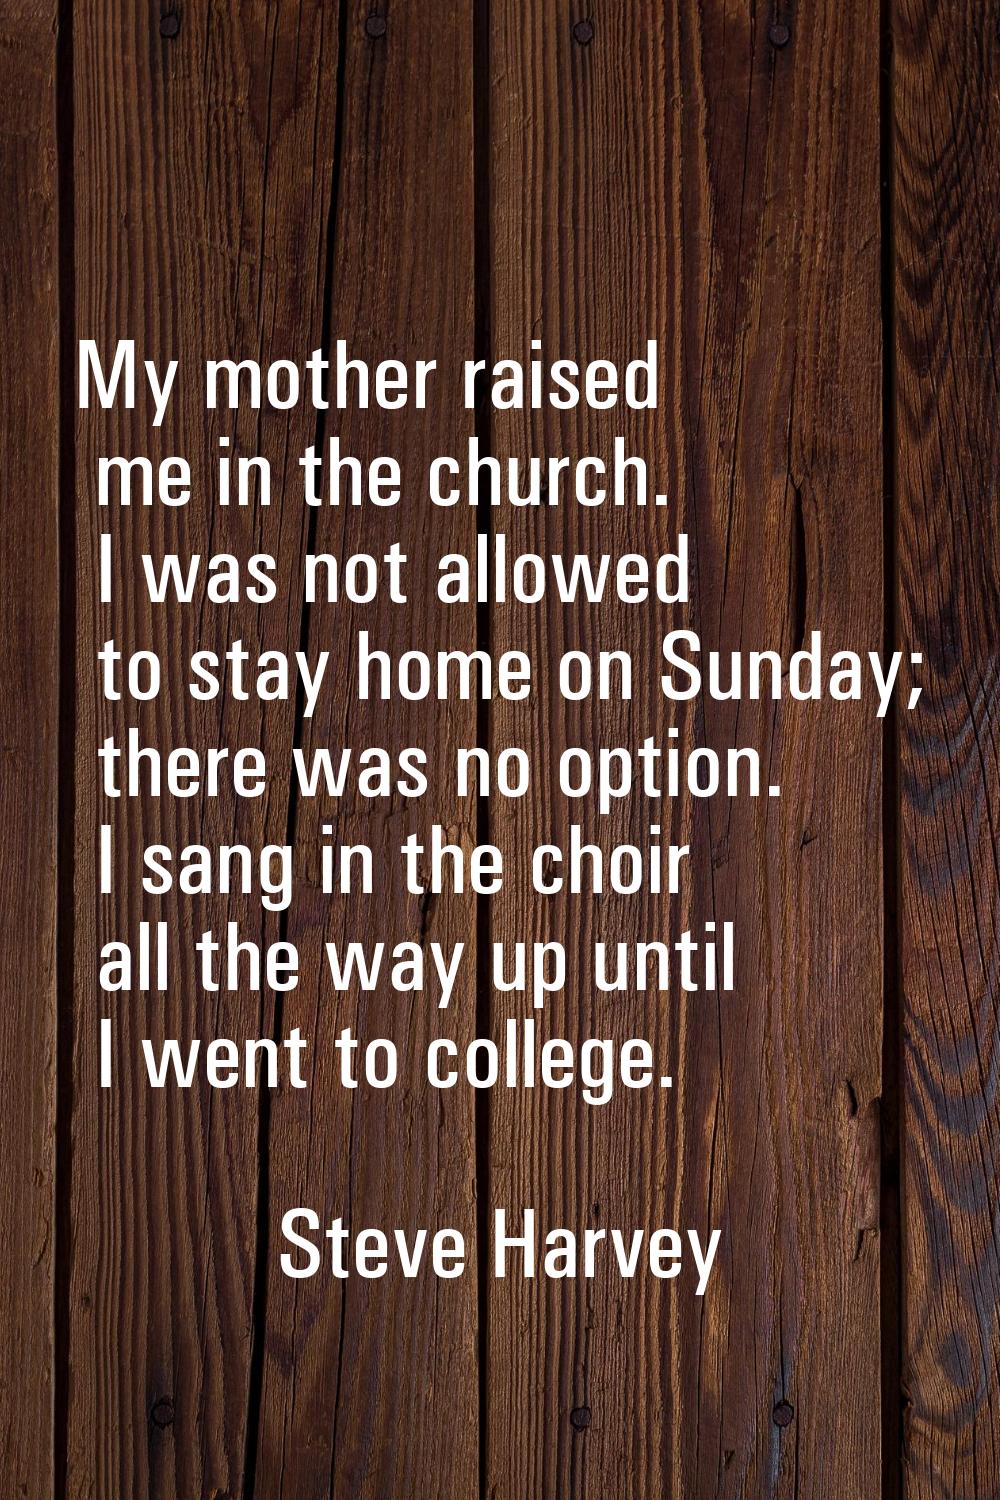 My mother raised me in the church. I was not allowed to stay home on Sunday; there was no option. I